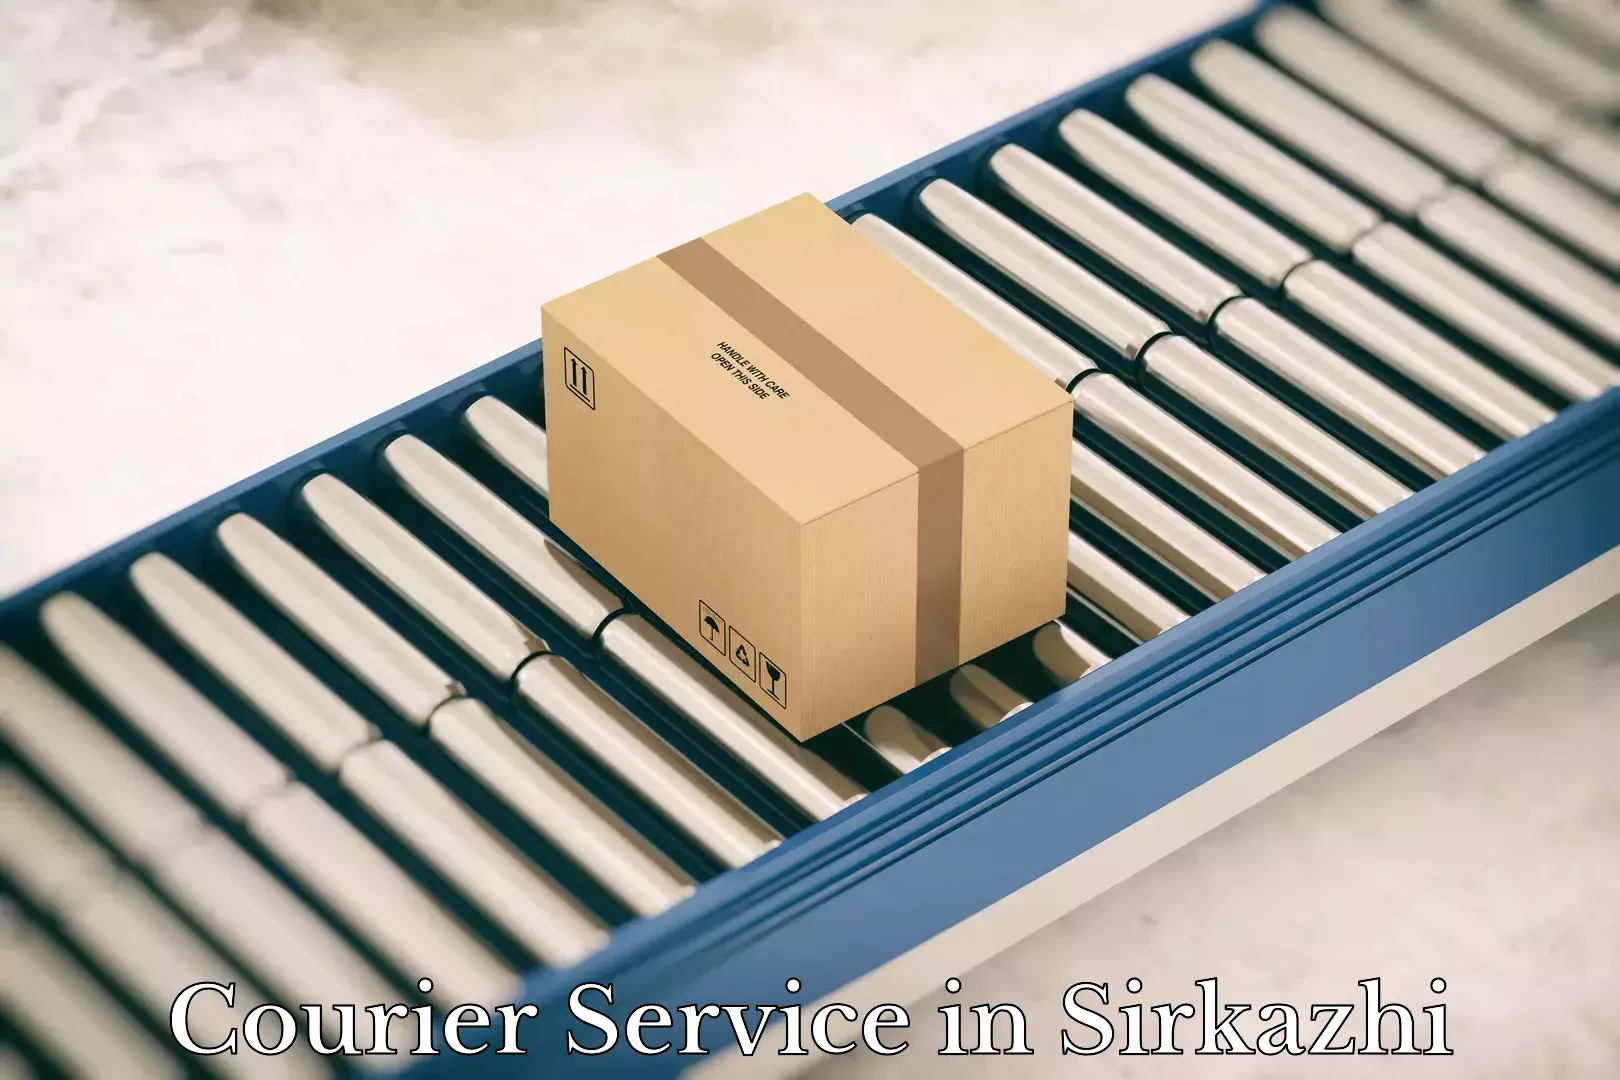 Express package delivery in Sirkazhi